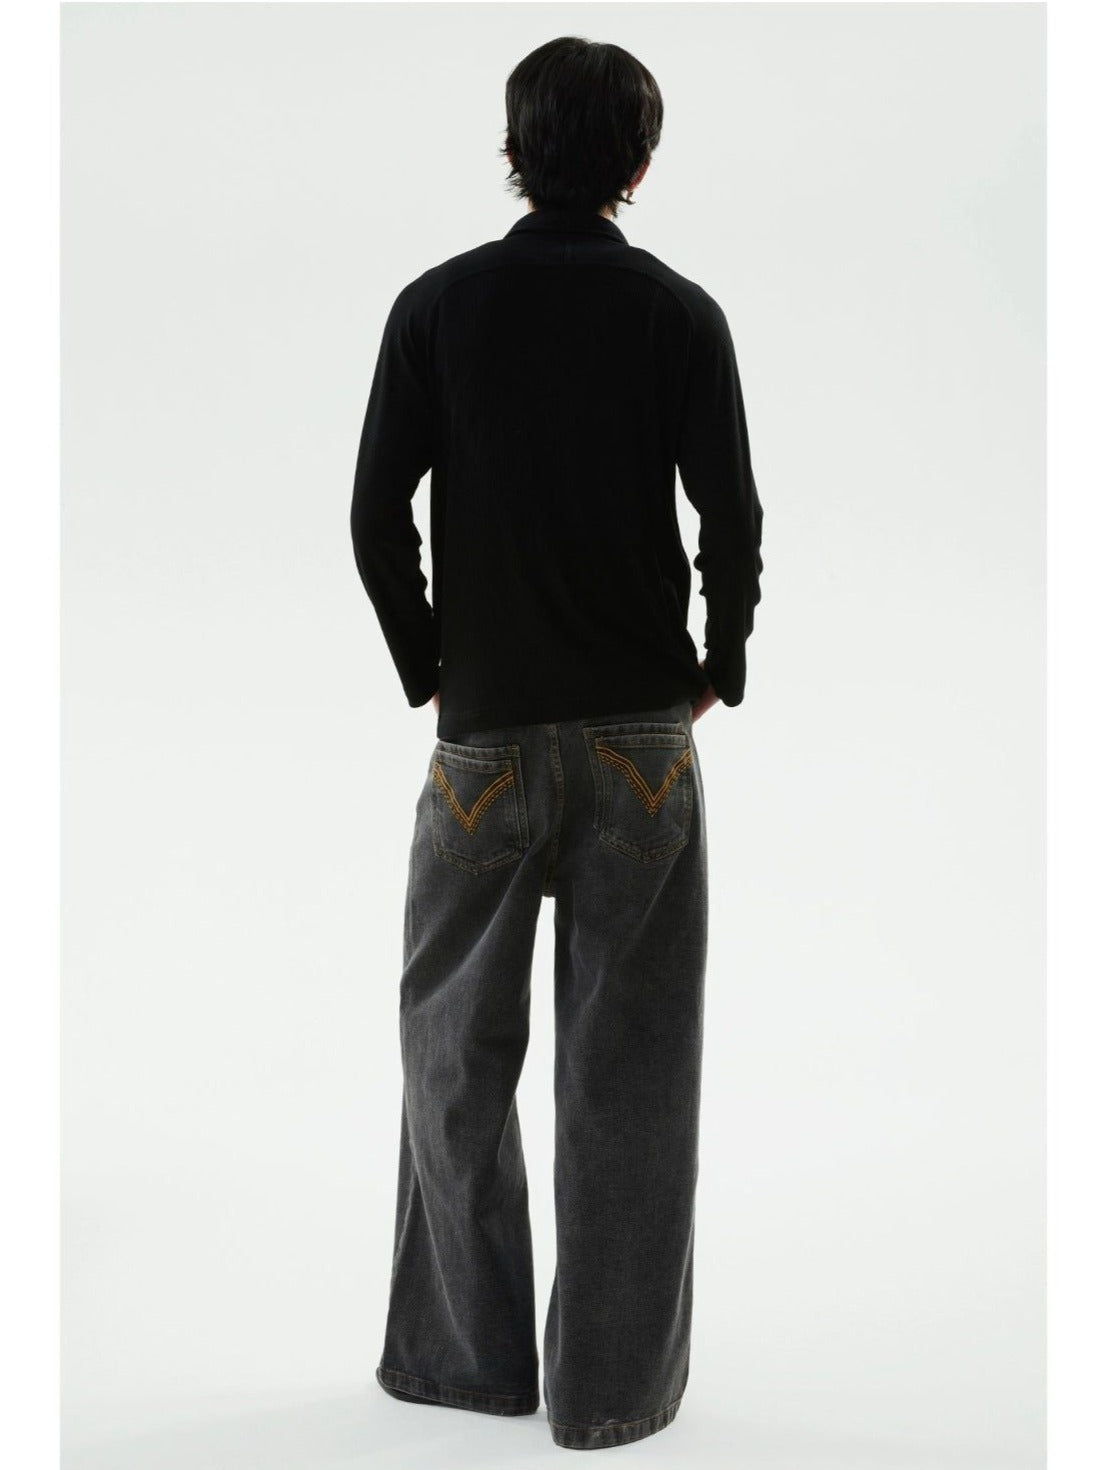 Comfty Fit Washed Jeans Korean Street Fashion Jeans By Funky Fun Shop Online at OH Vault